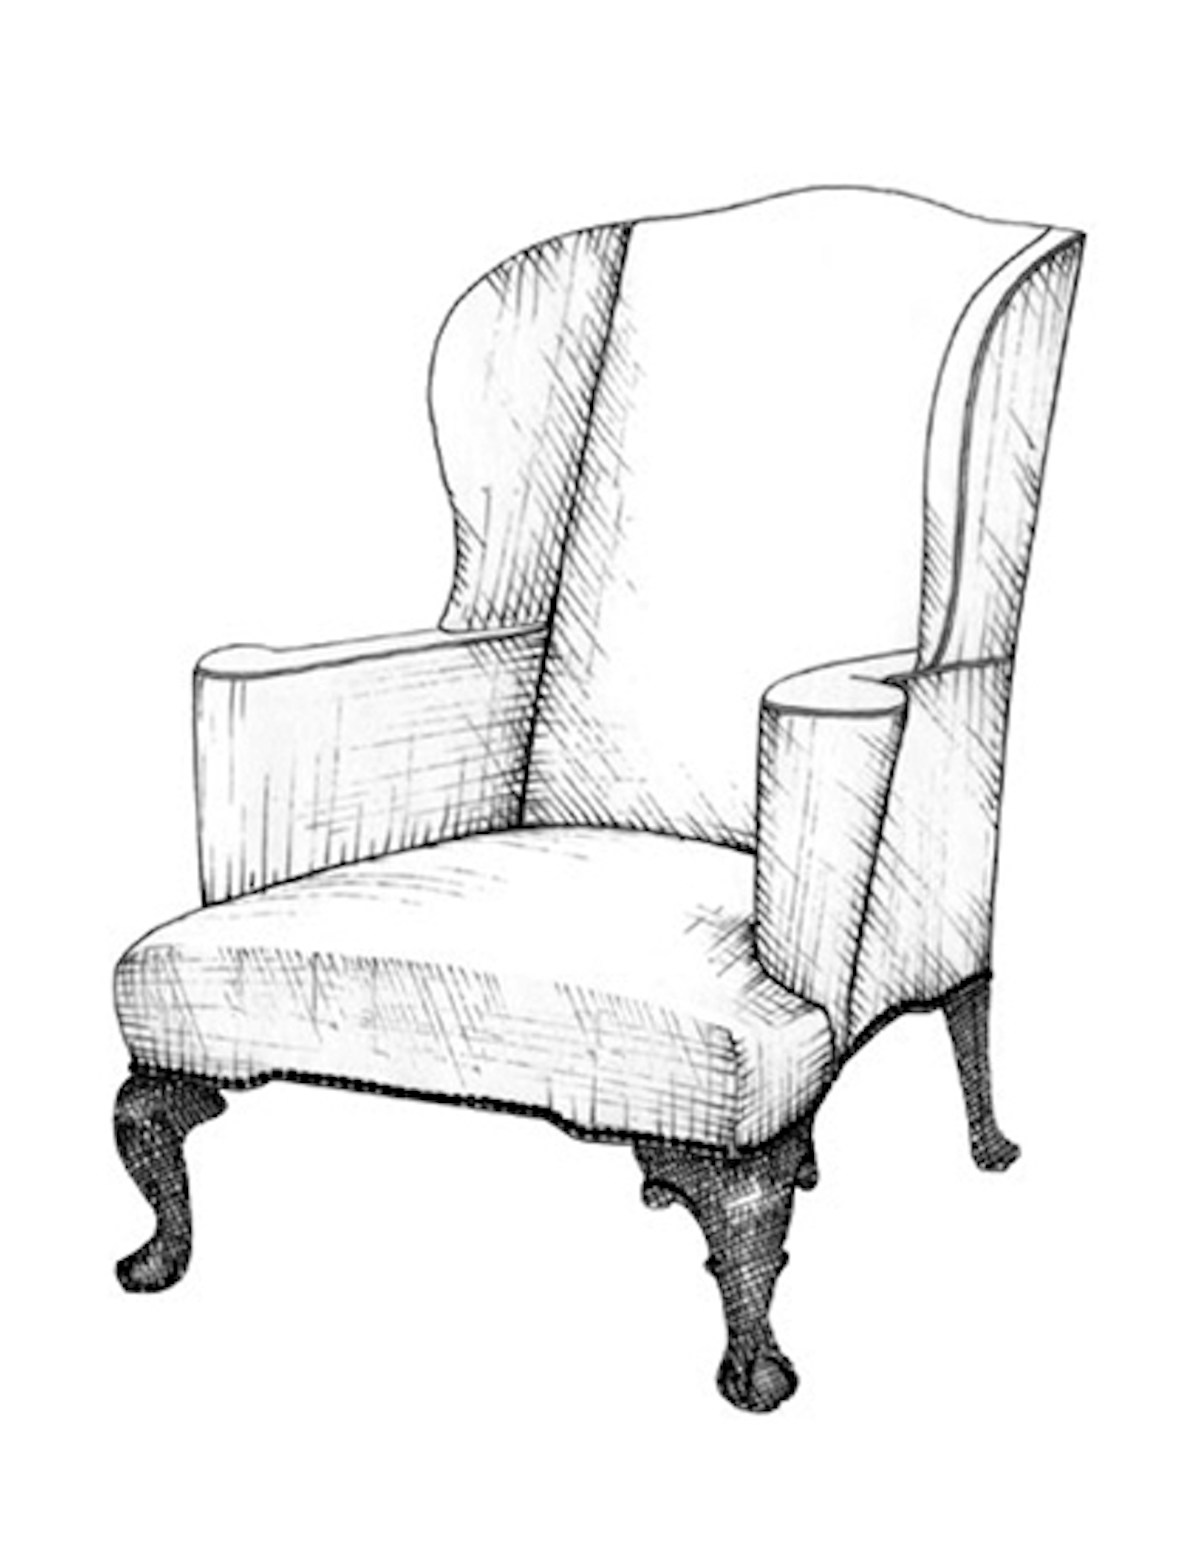 The Best of Chair Design - Top 10 Chair Styles - Wing chair